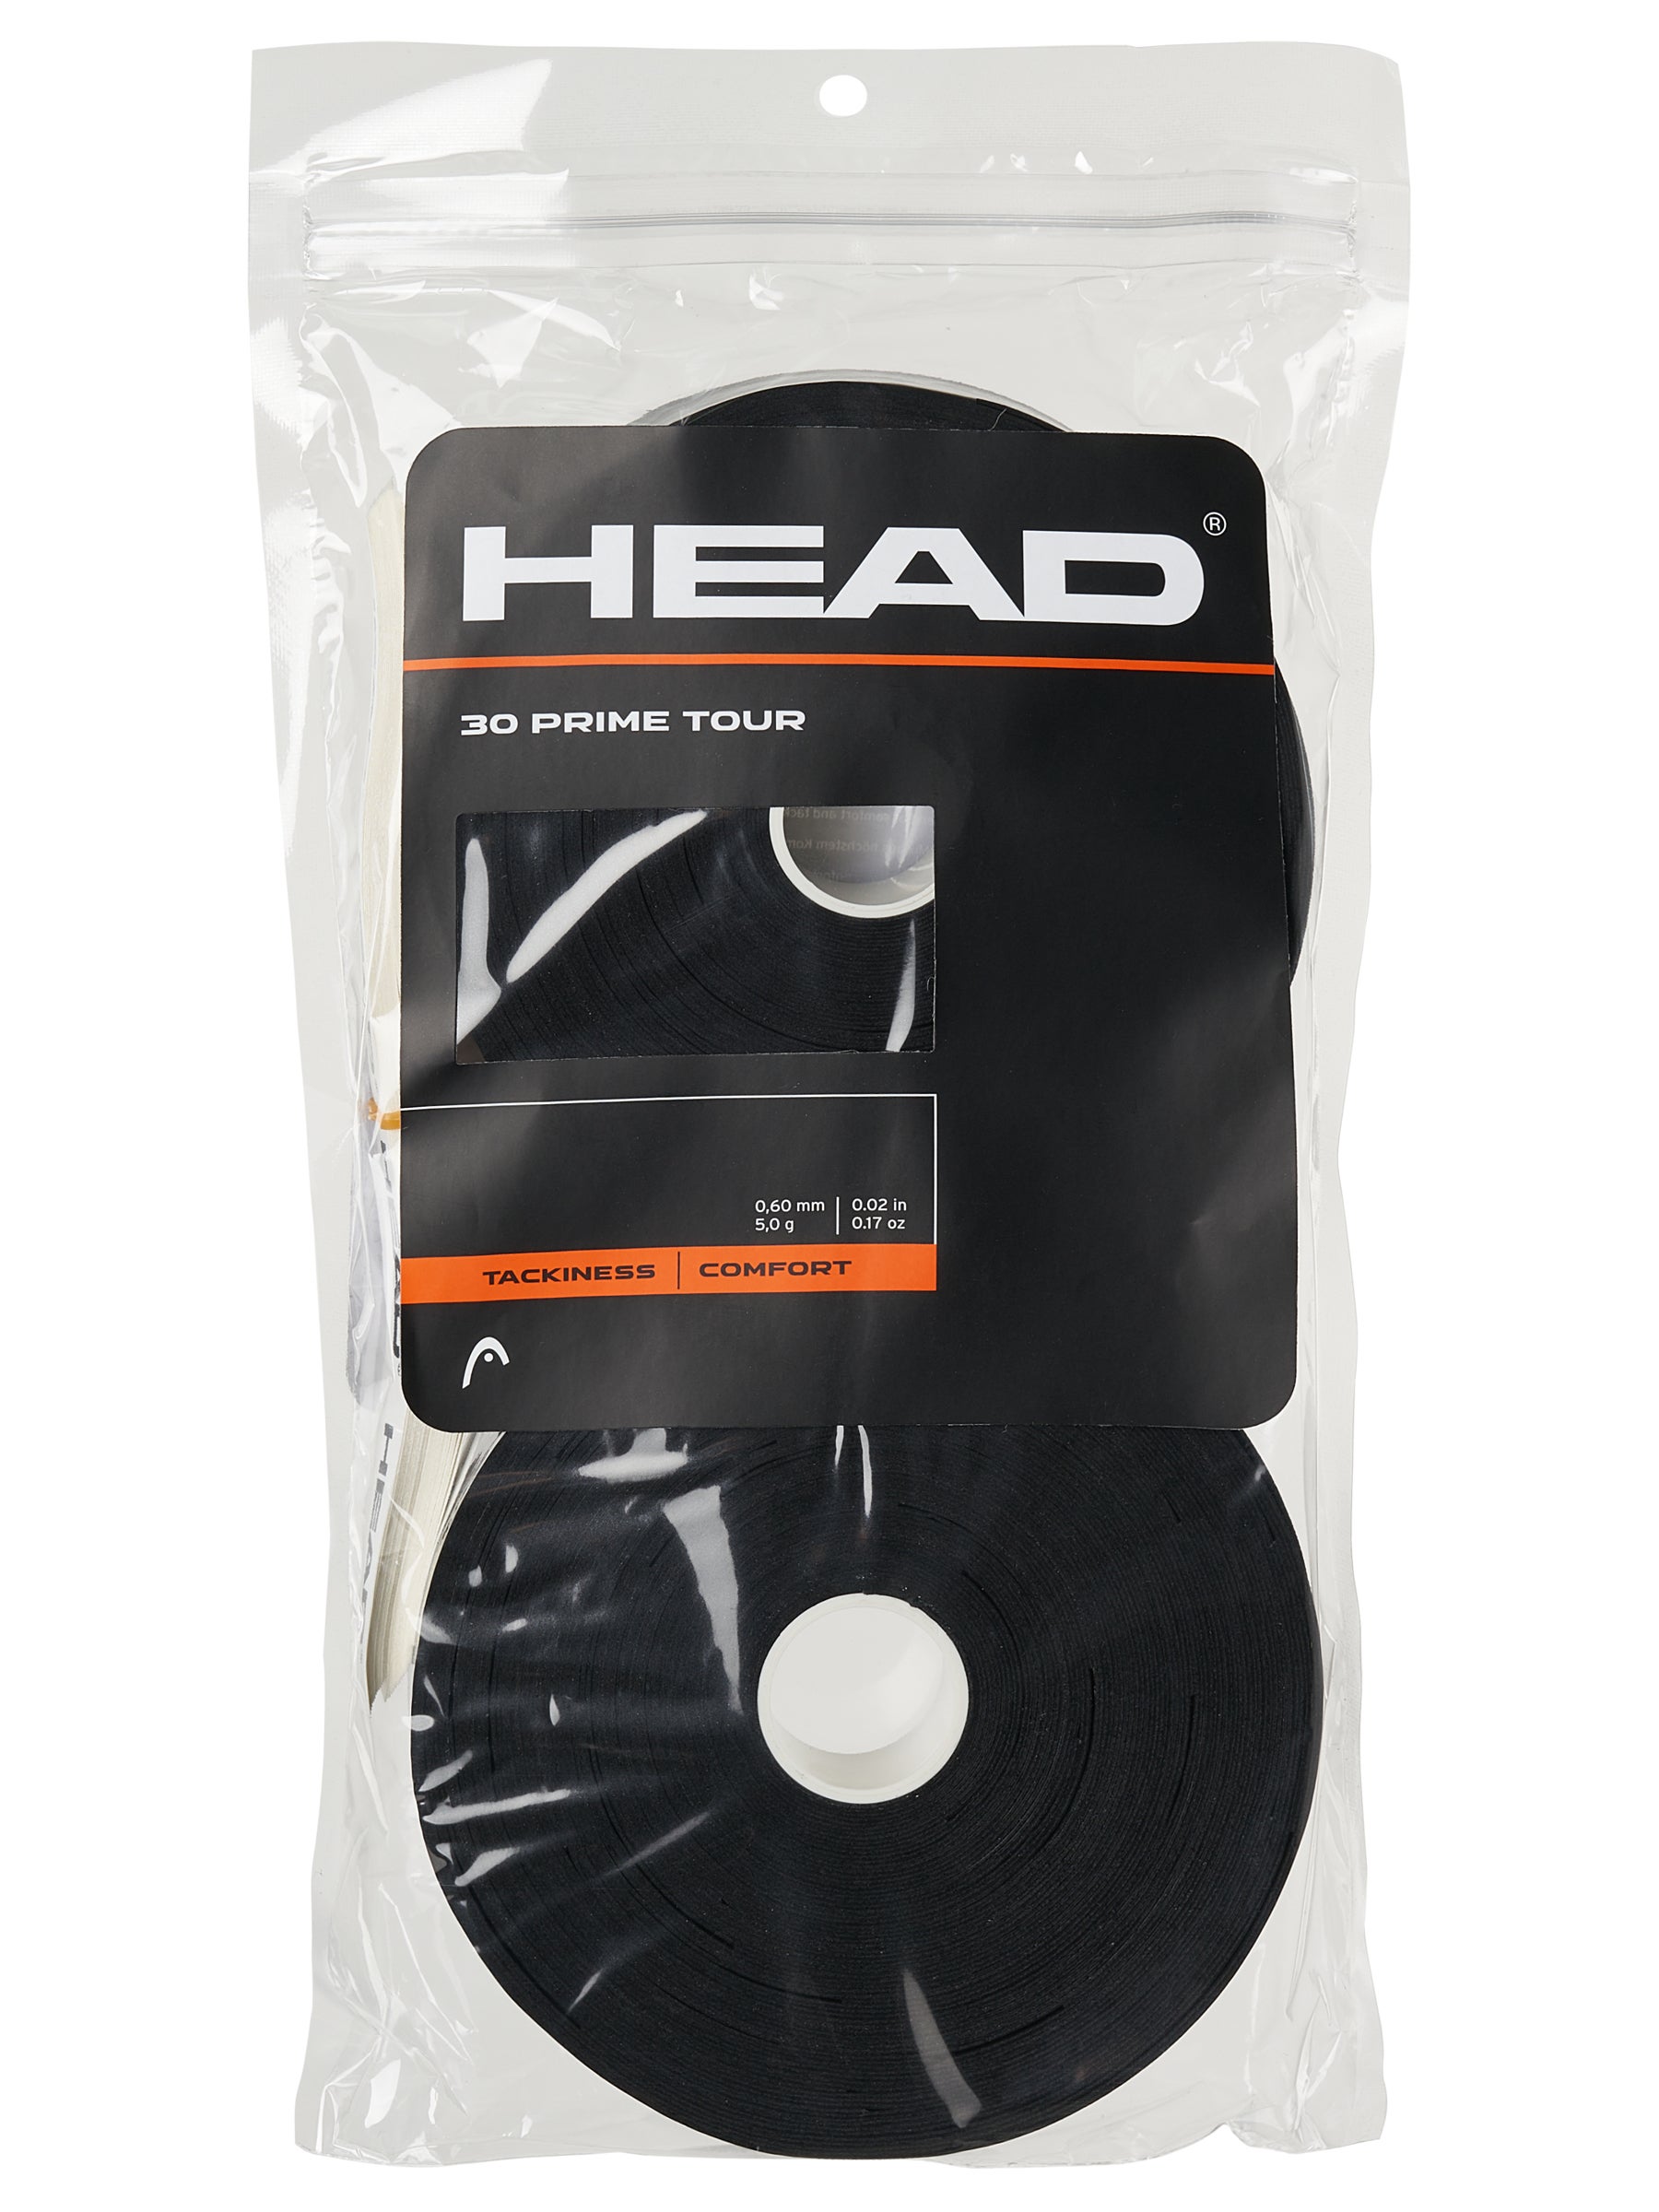 Head PRIME TOUR tennis overgrip over grip various colours available 